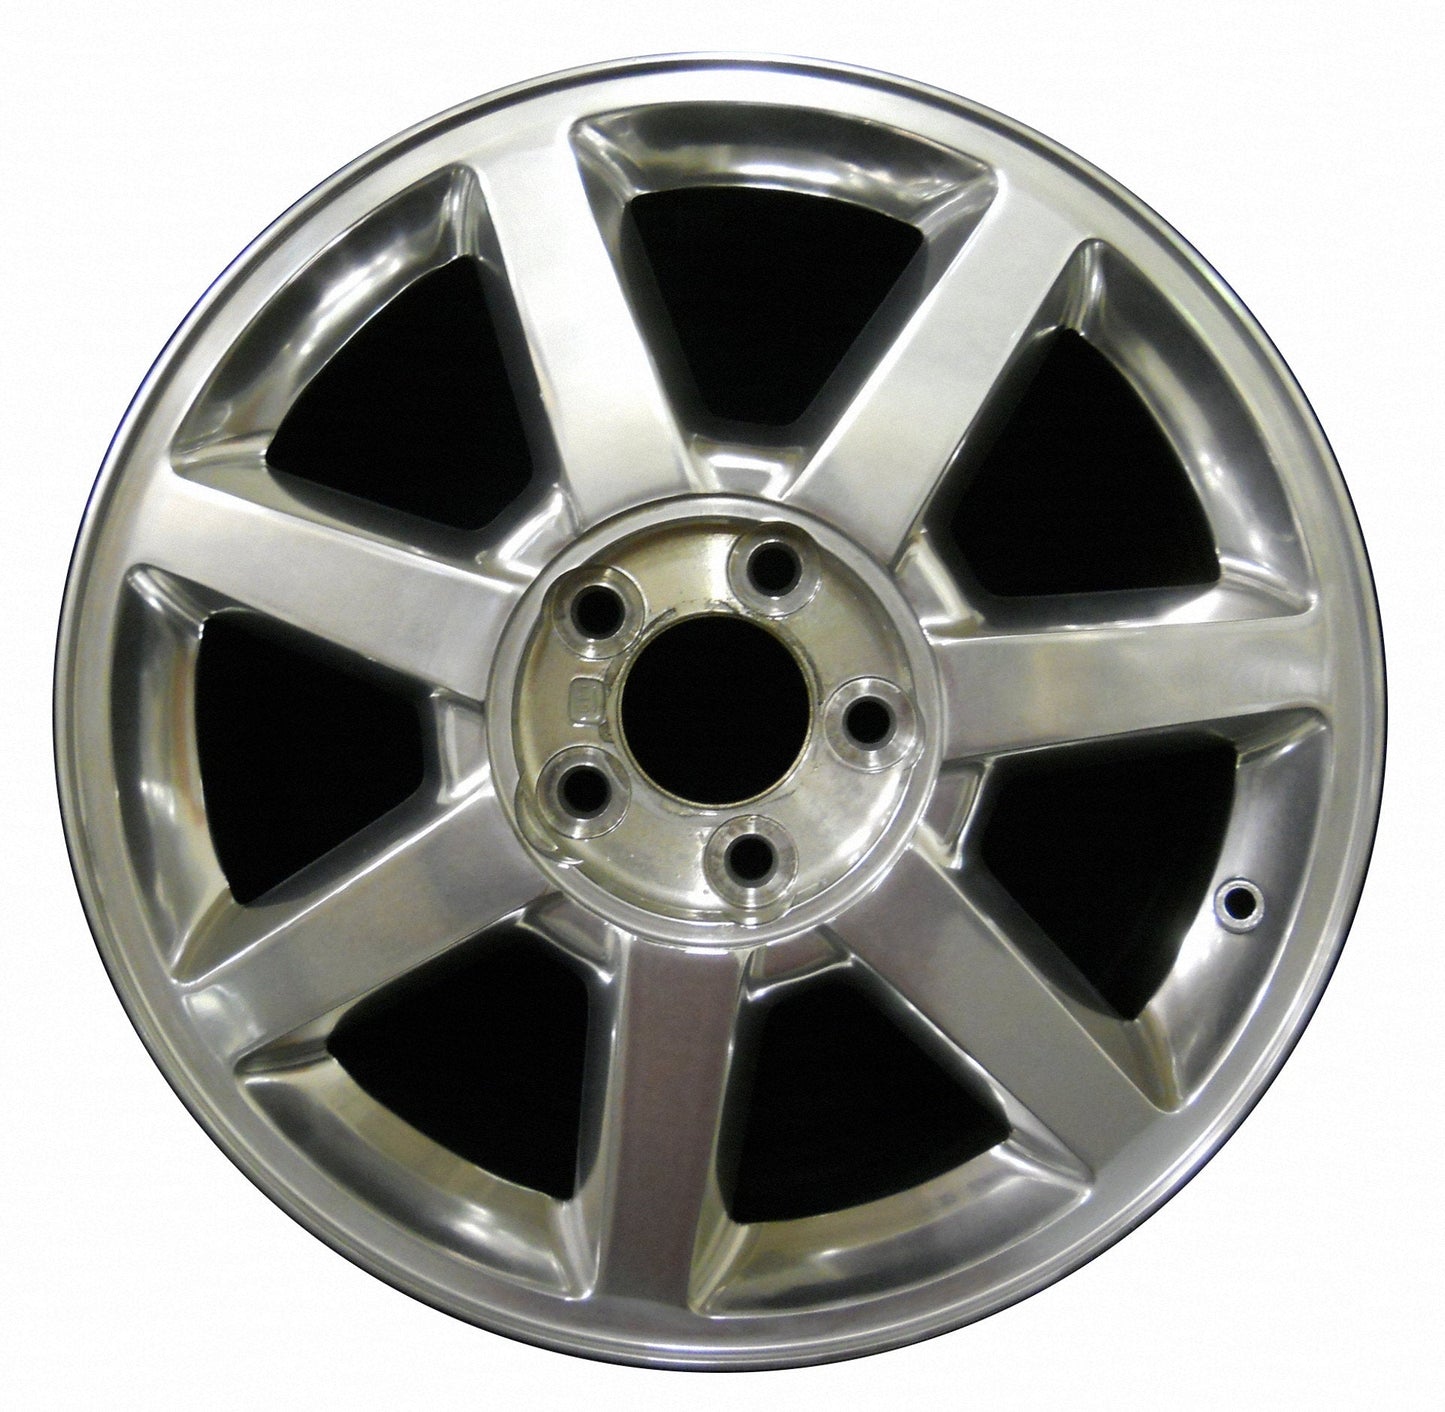 Cadillac STS  2005, 2006, 2007, 2008 Factory OEM Car Wheel Size 17x8 Alloy WAO.4587RE.FULL.POL